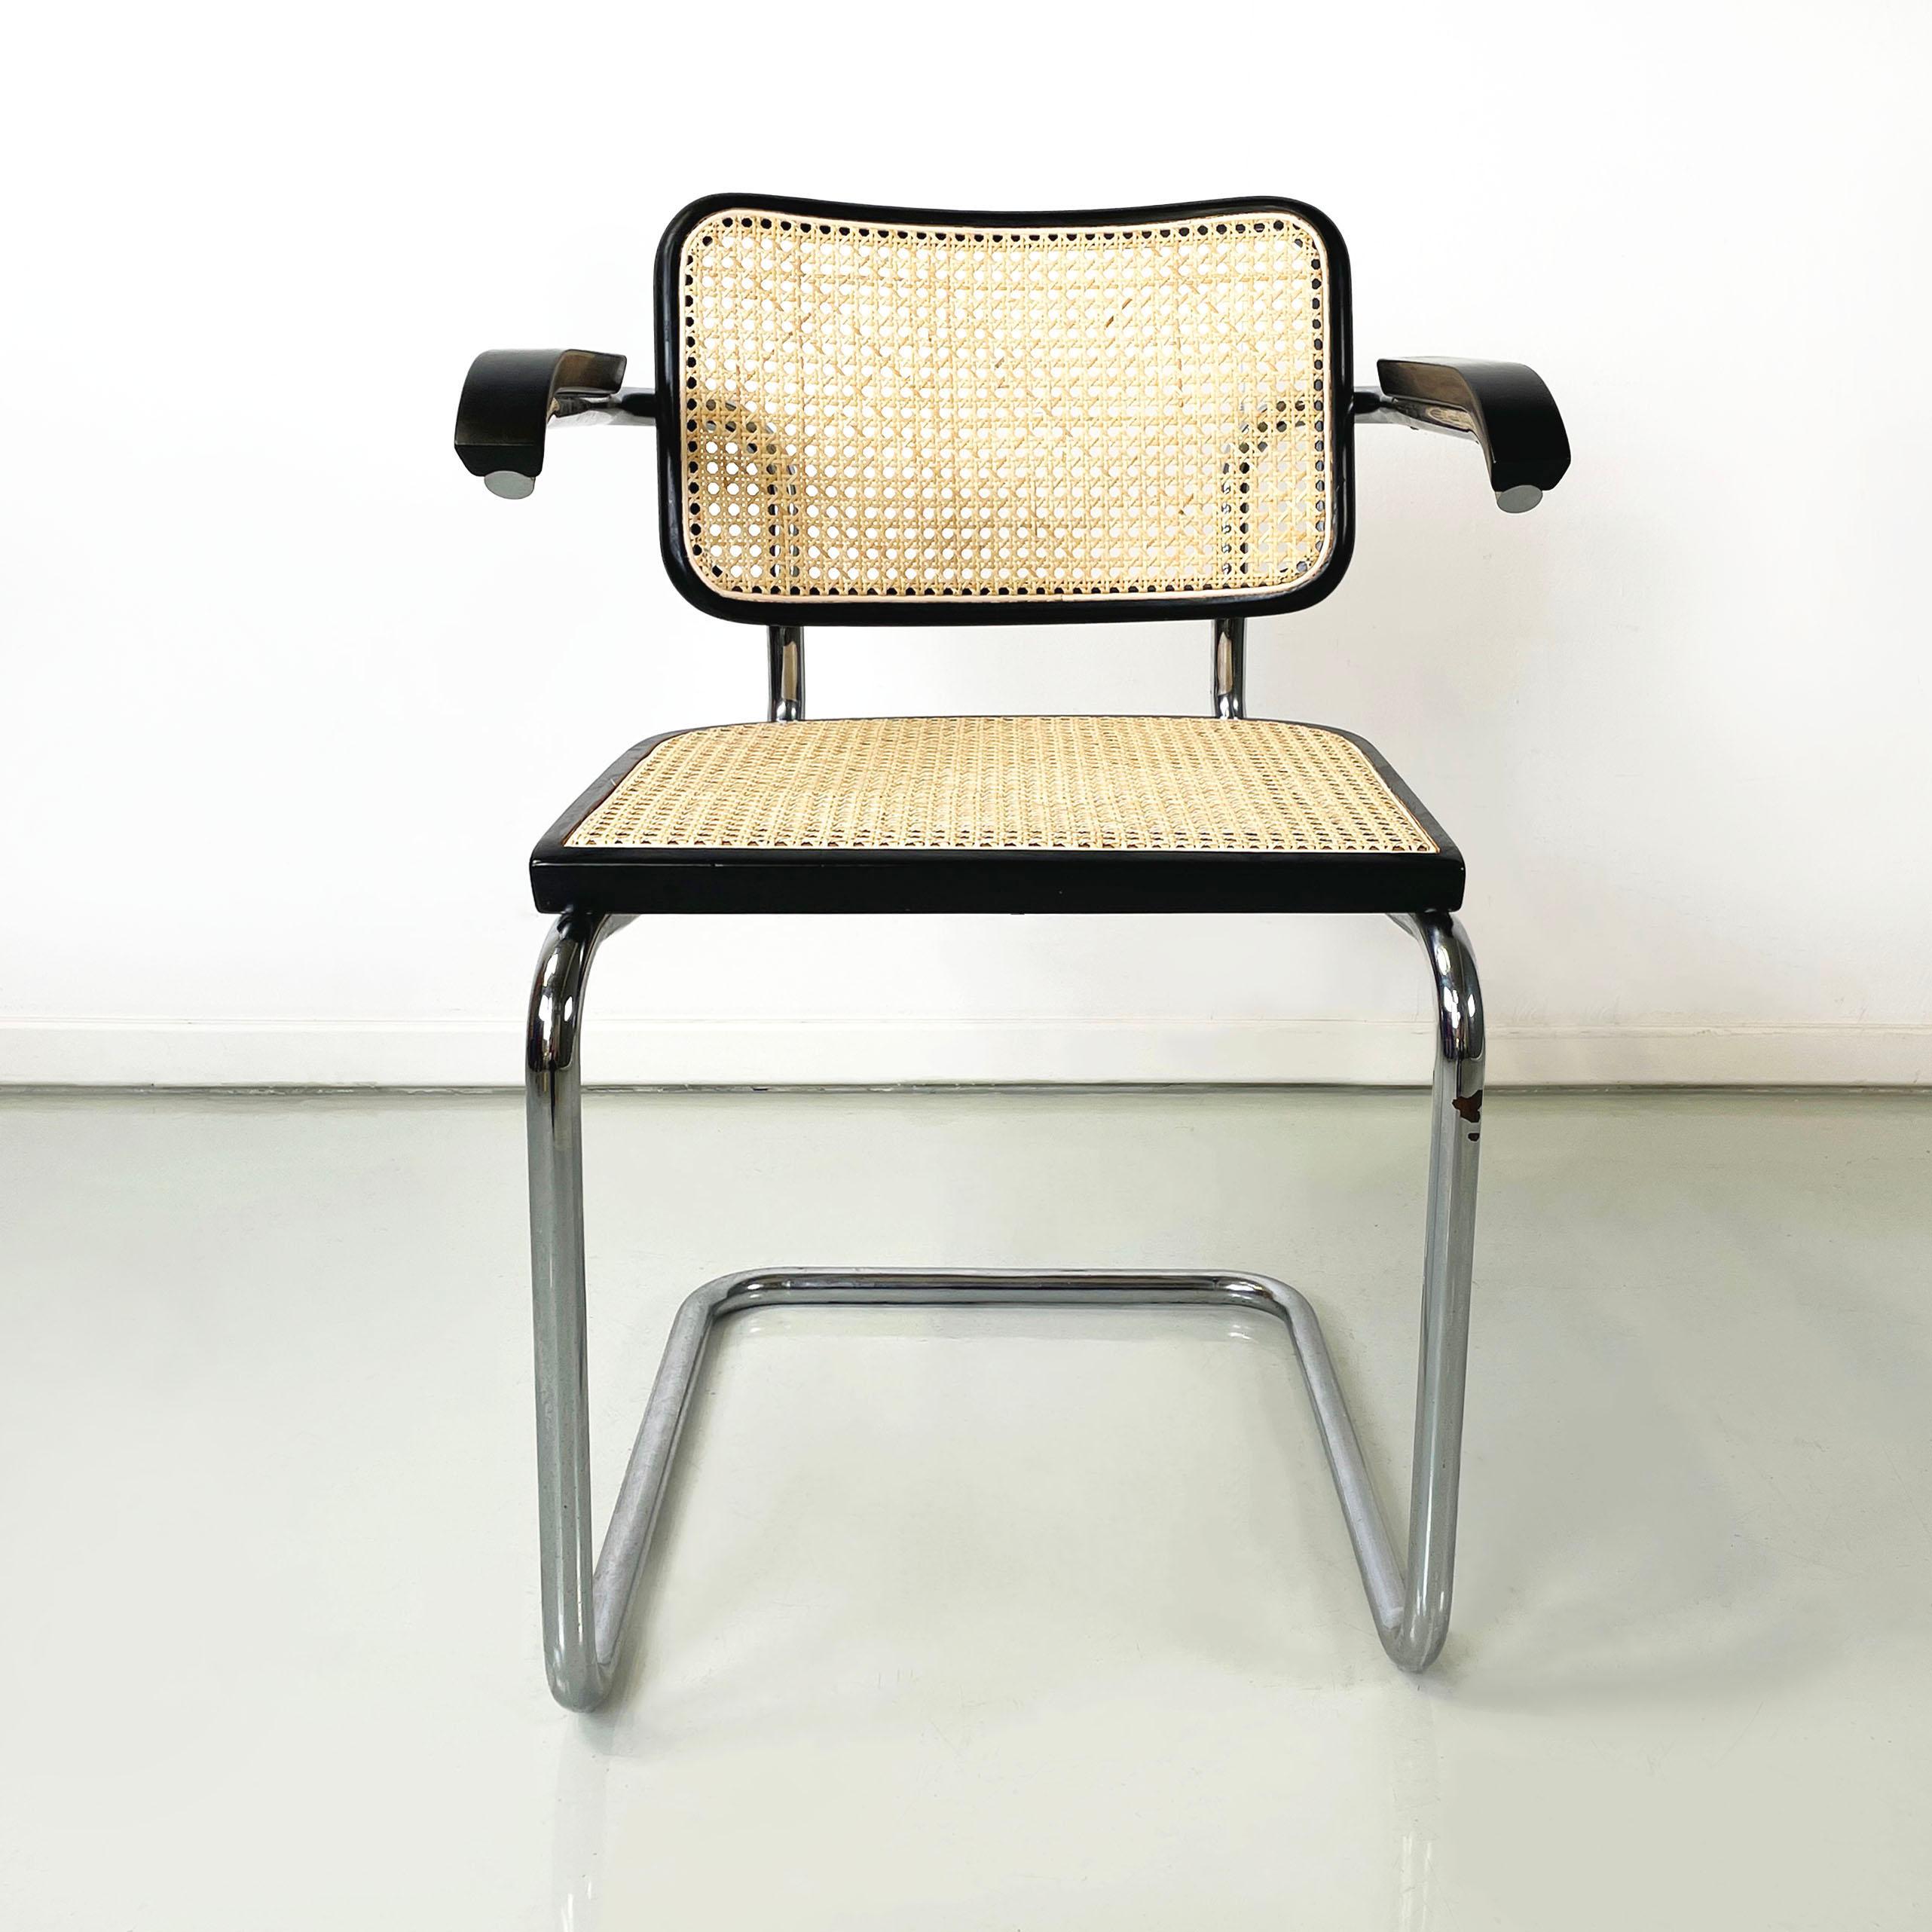 Italian mid-century modern Chair with armrests by Marcel Breuer for Gavina, 1960s
Chair with armrests mod. Cesca. The seat and back are in light Vienna straw with black painted wooden profiles. The structure is made of tubular steel. The armrests